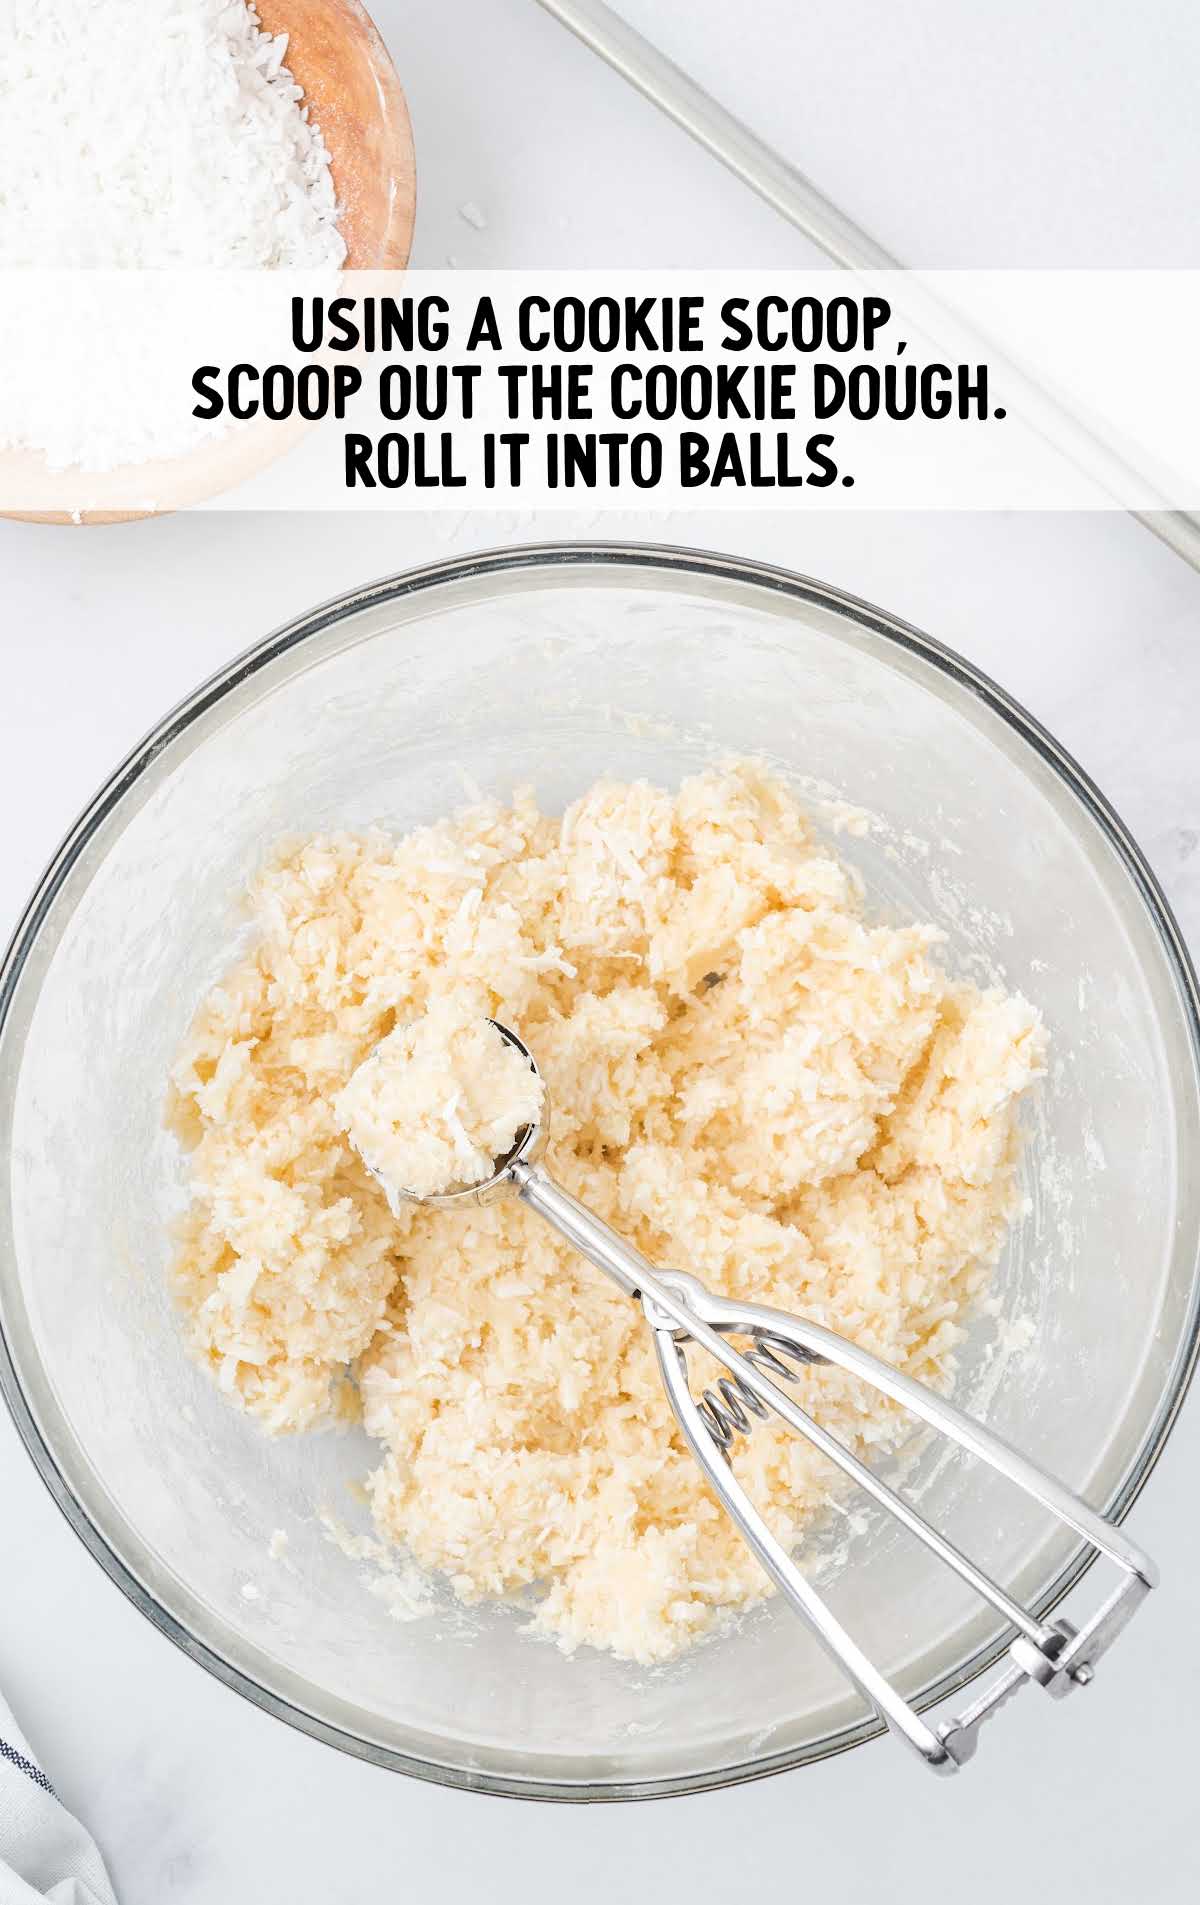 using a cookie scoop, scoop out cookie dough and roll into balls in a bowl